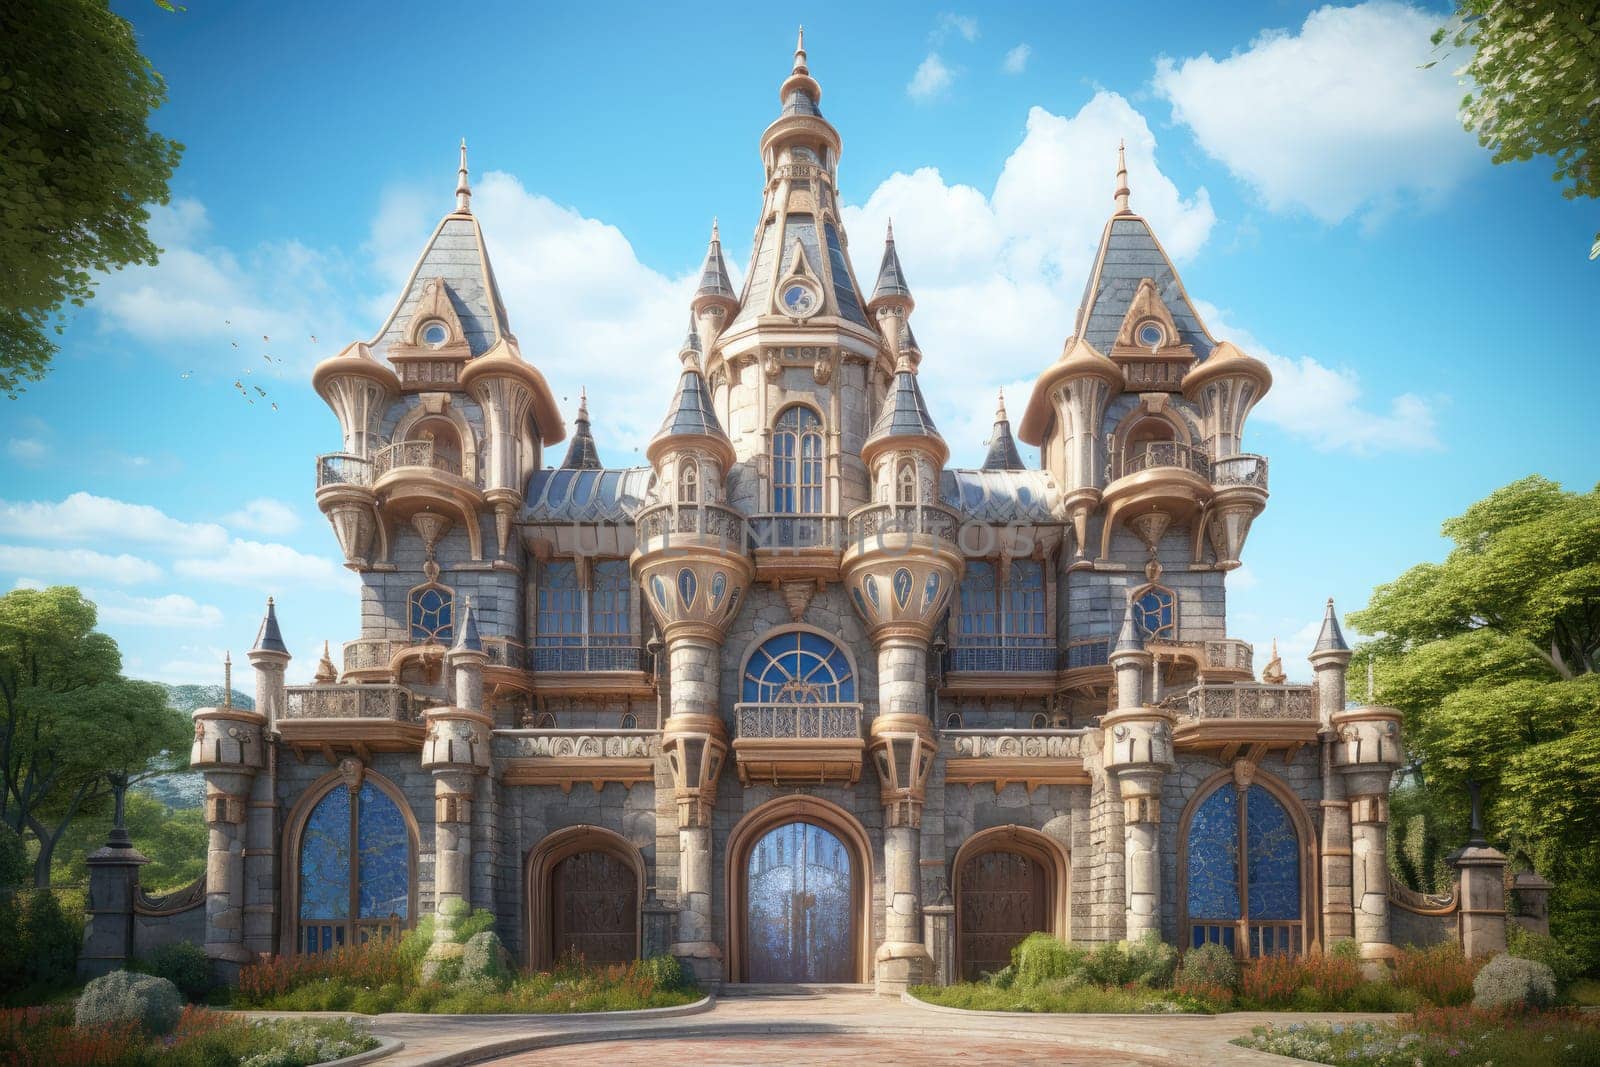 This magical castle delights with its elegance and beauty. Charming wrought-iron grilles and carved doors give it a special charm and mystery.